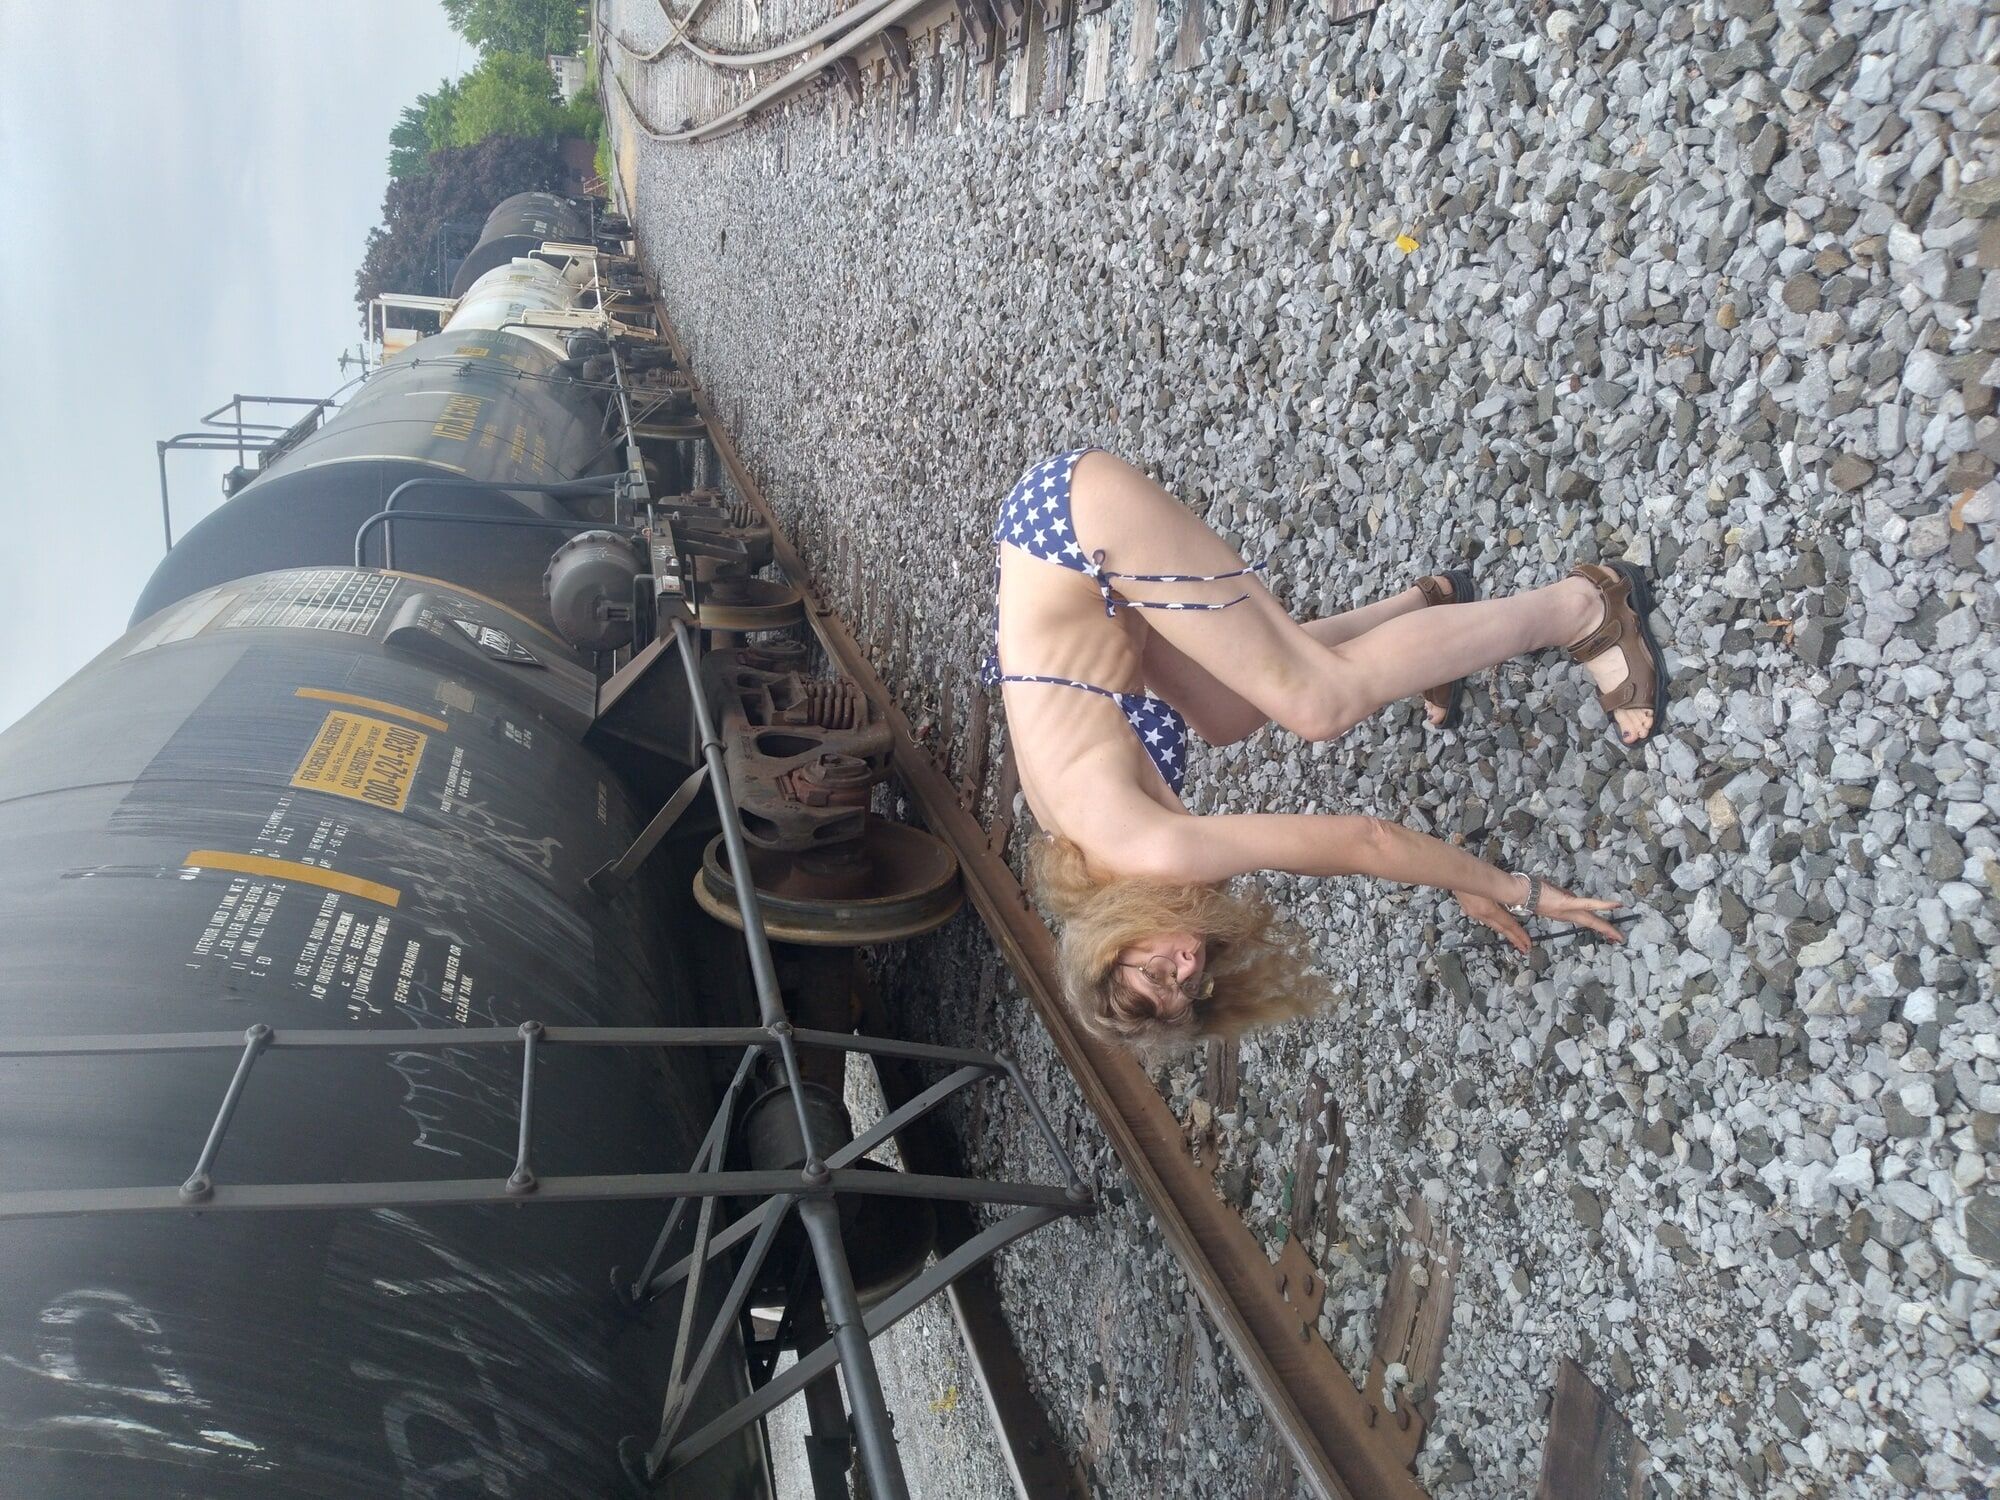 American Train. July 4th release. My best photo set to date. #38